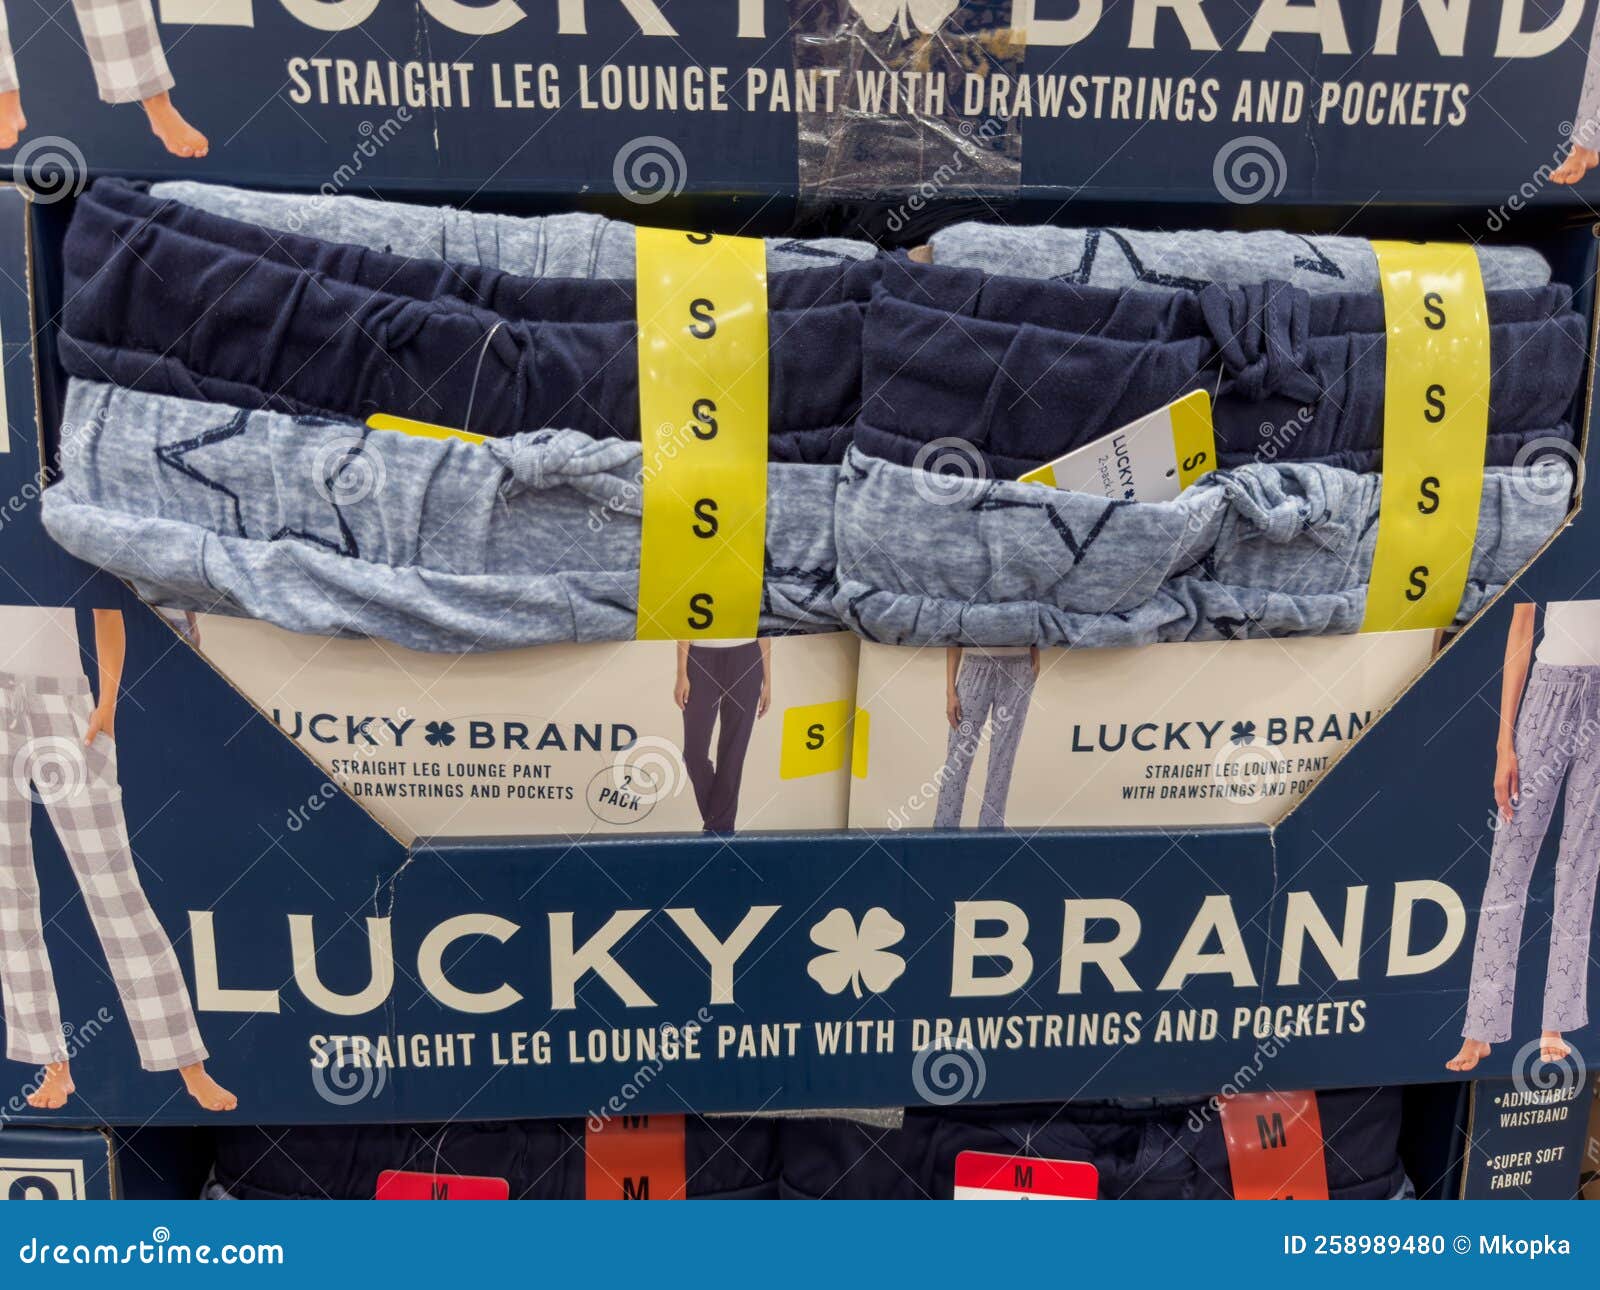 Packages of Lucky Brand Pajamas and Lounge Pants for Sale at a